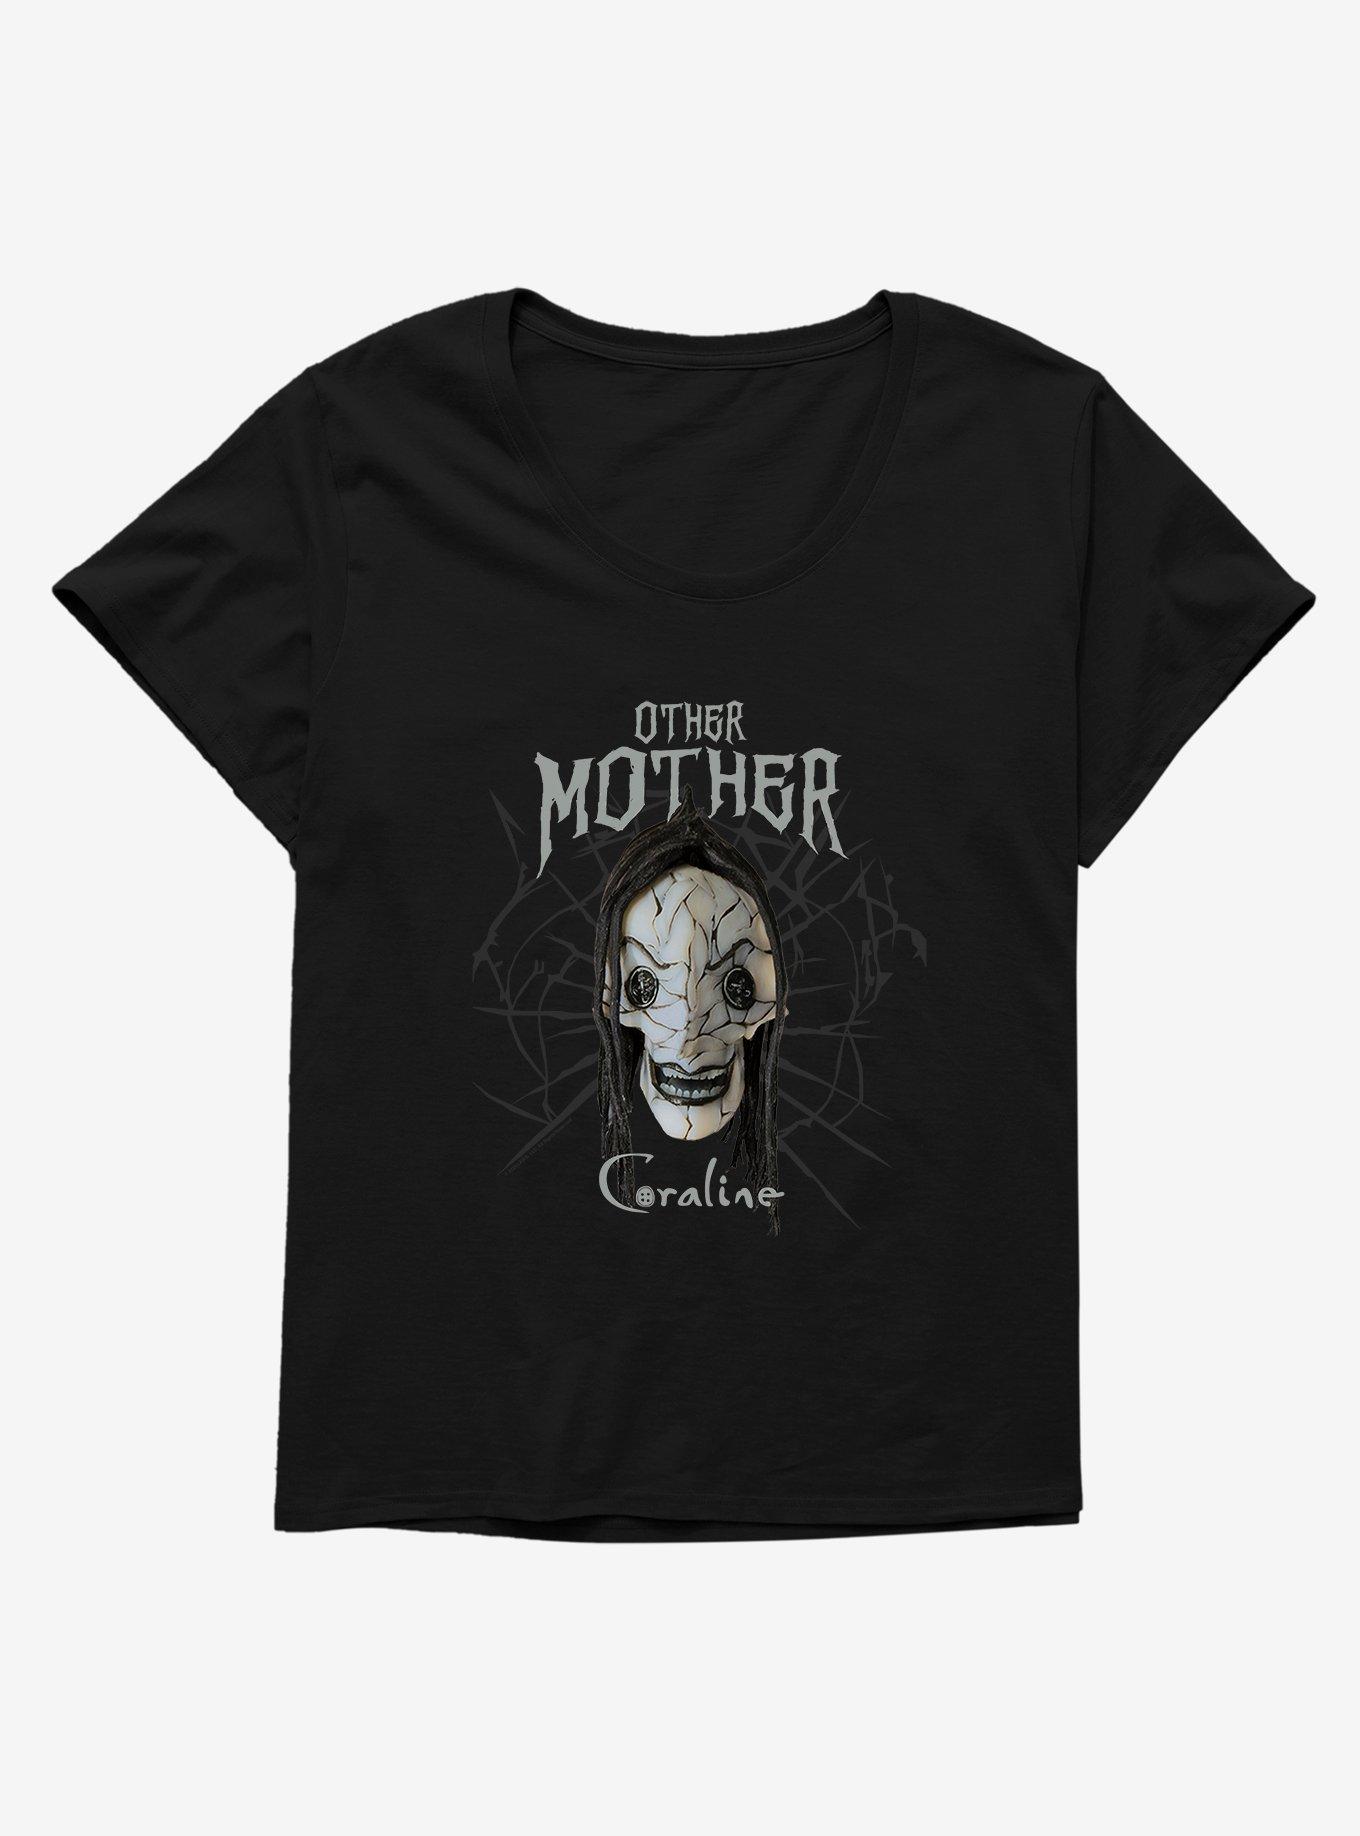 Coraline Other Mother Girls T-Shirt Plus